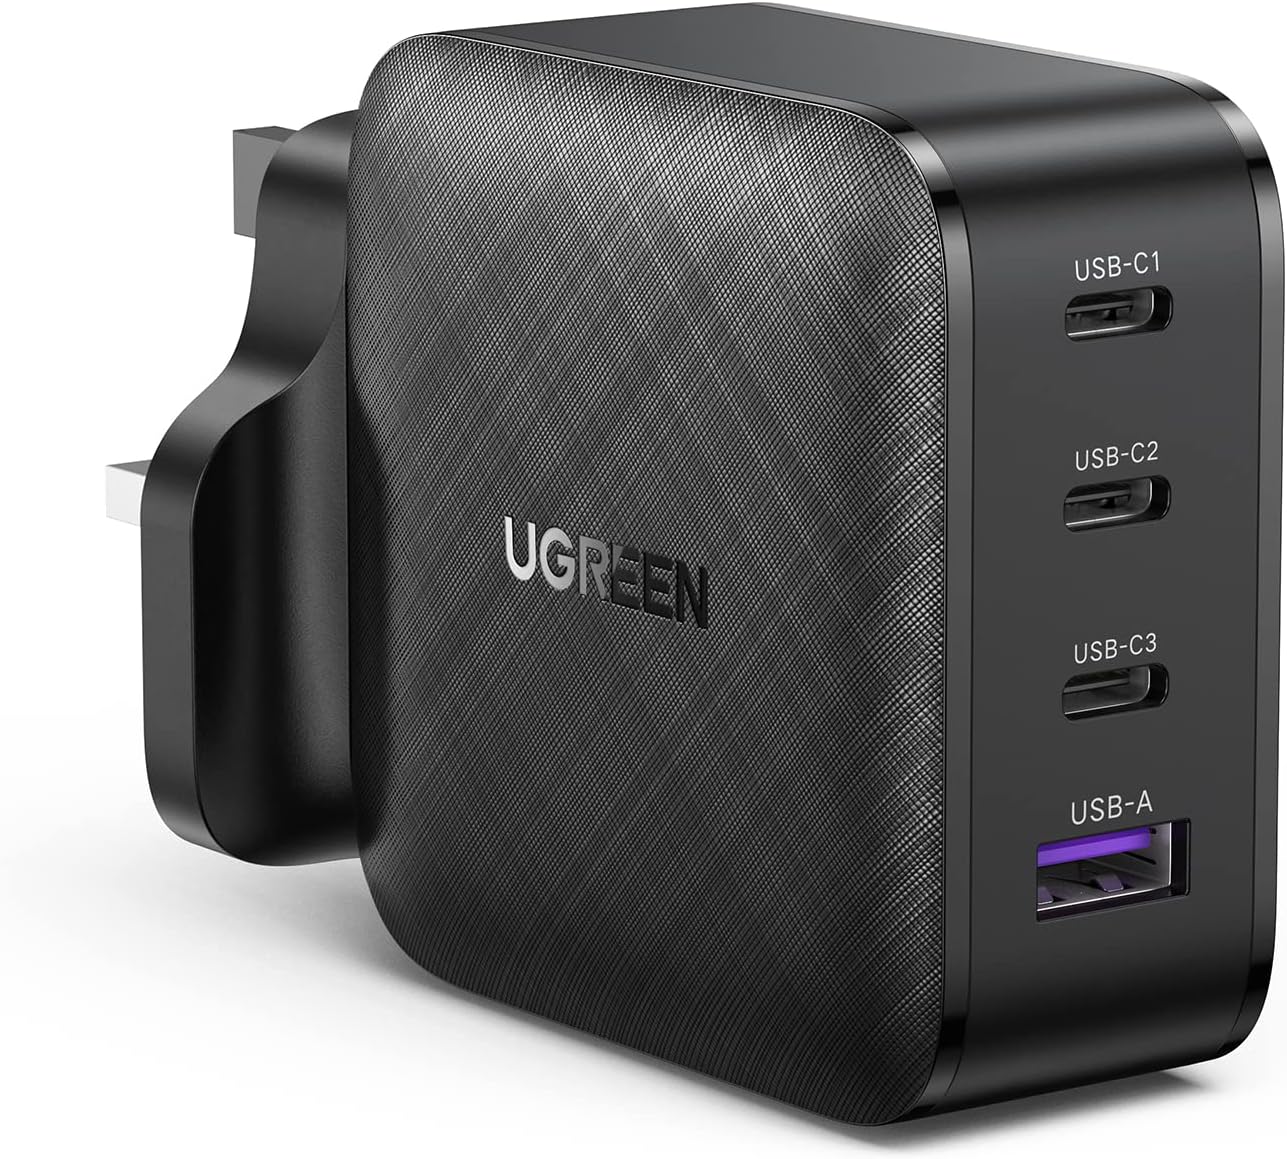 UGREEN 4 Ports USB C GaN Charger Plug Type C PD 65W QC 3.0 Fast Wall Mains Power Delivery Adapter for Laptops, MacBook Pro/Air, Steam Deck, iPad, iPhone,Samsung, Huawei, Oneplus, Xiaomi, Dell, Lenovo